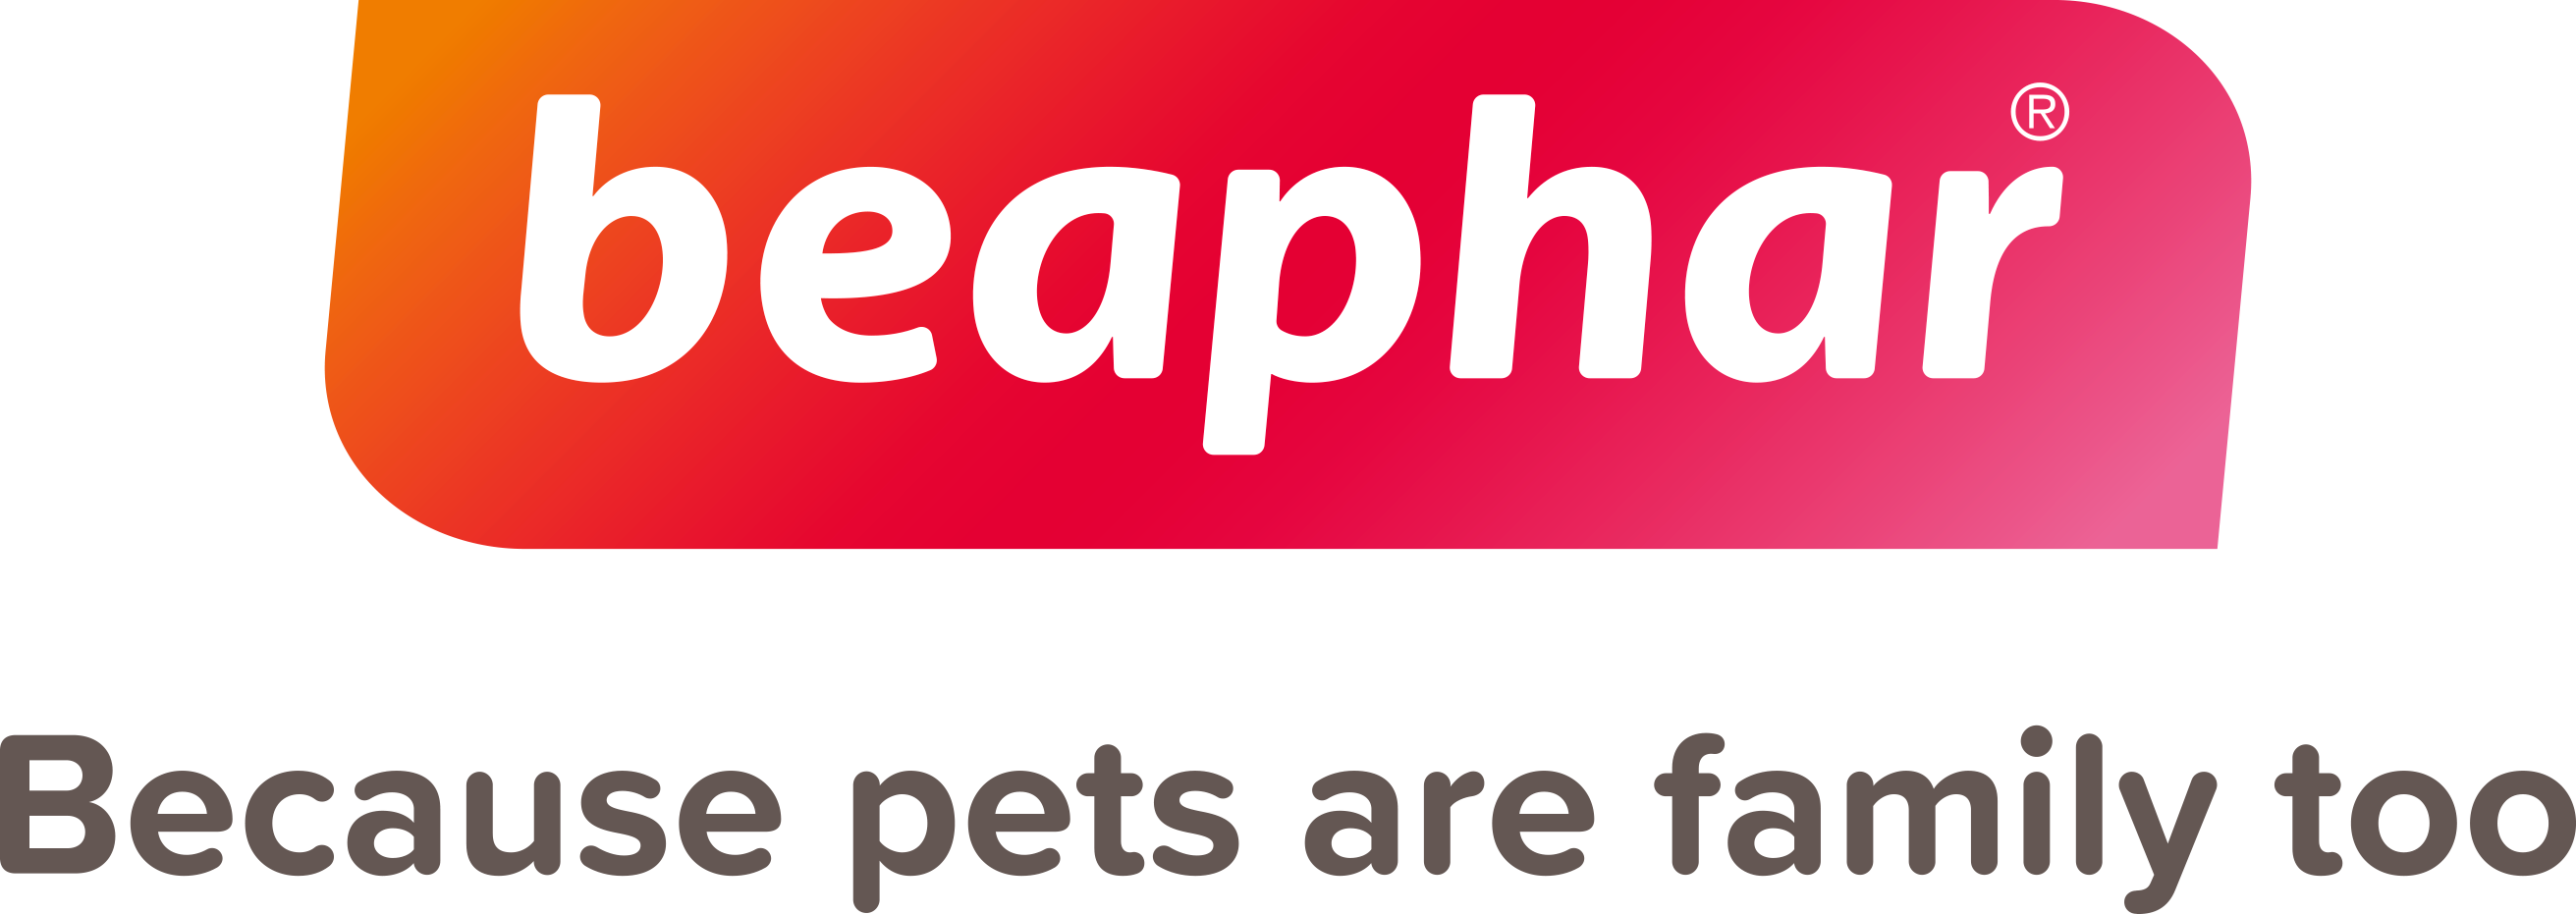 Beaphar - Because pets are family too